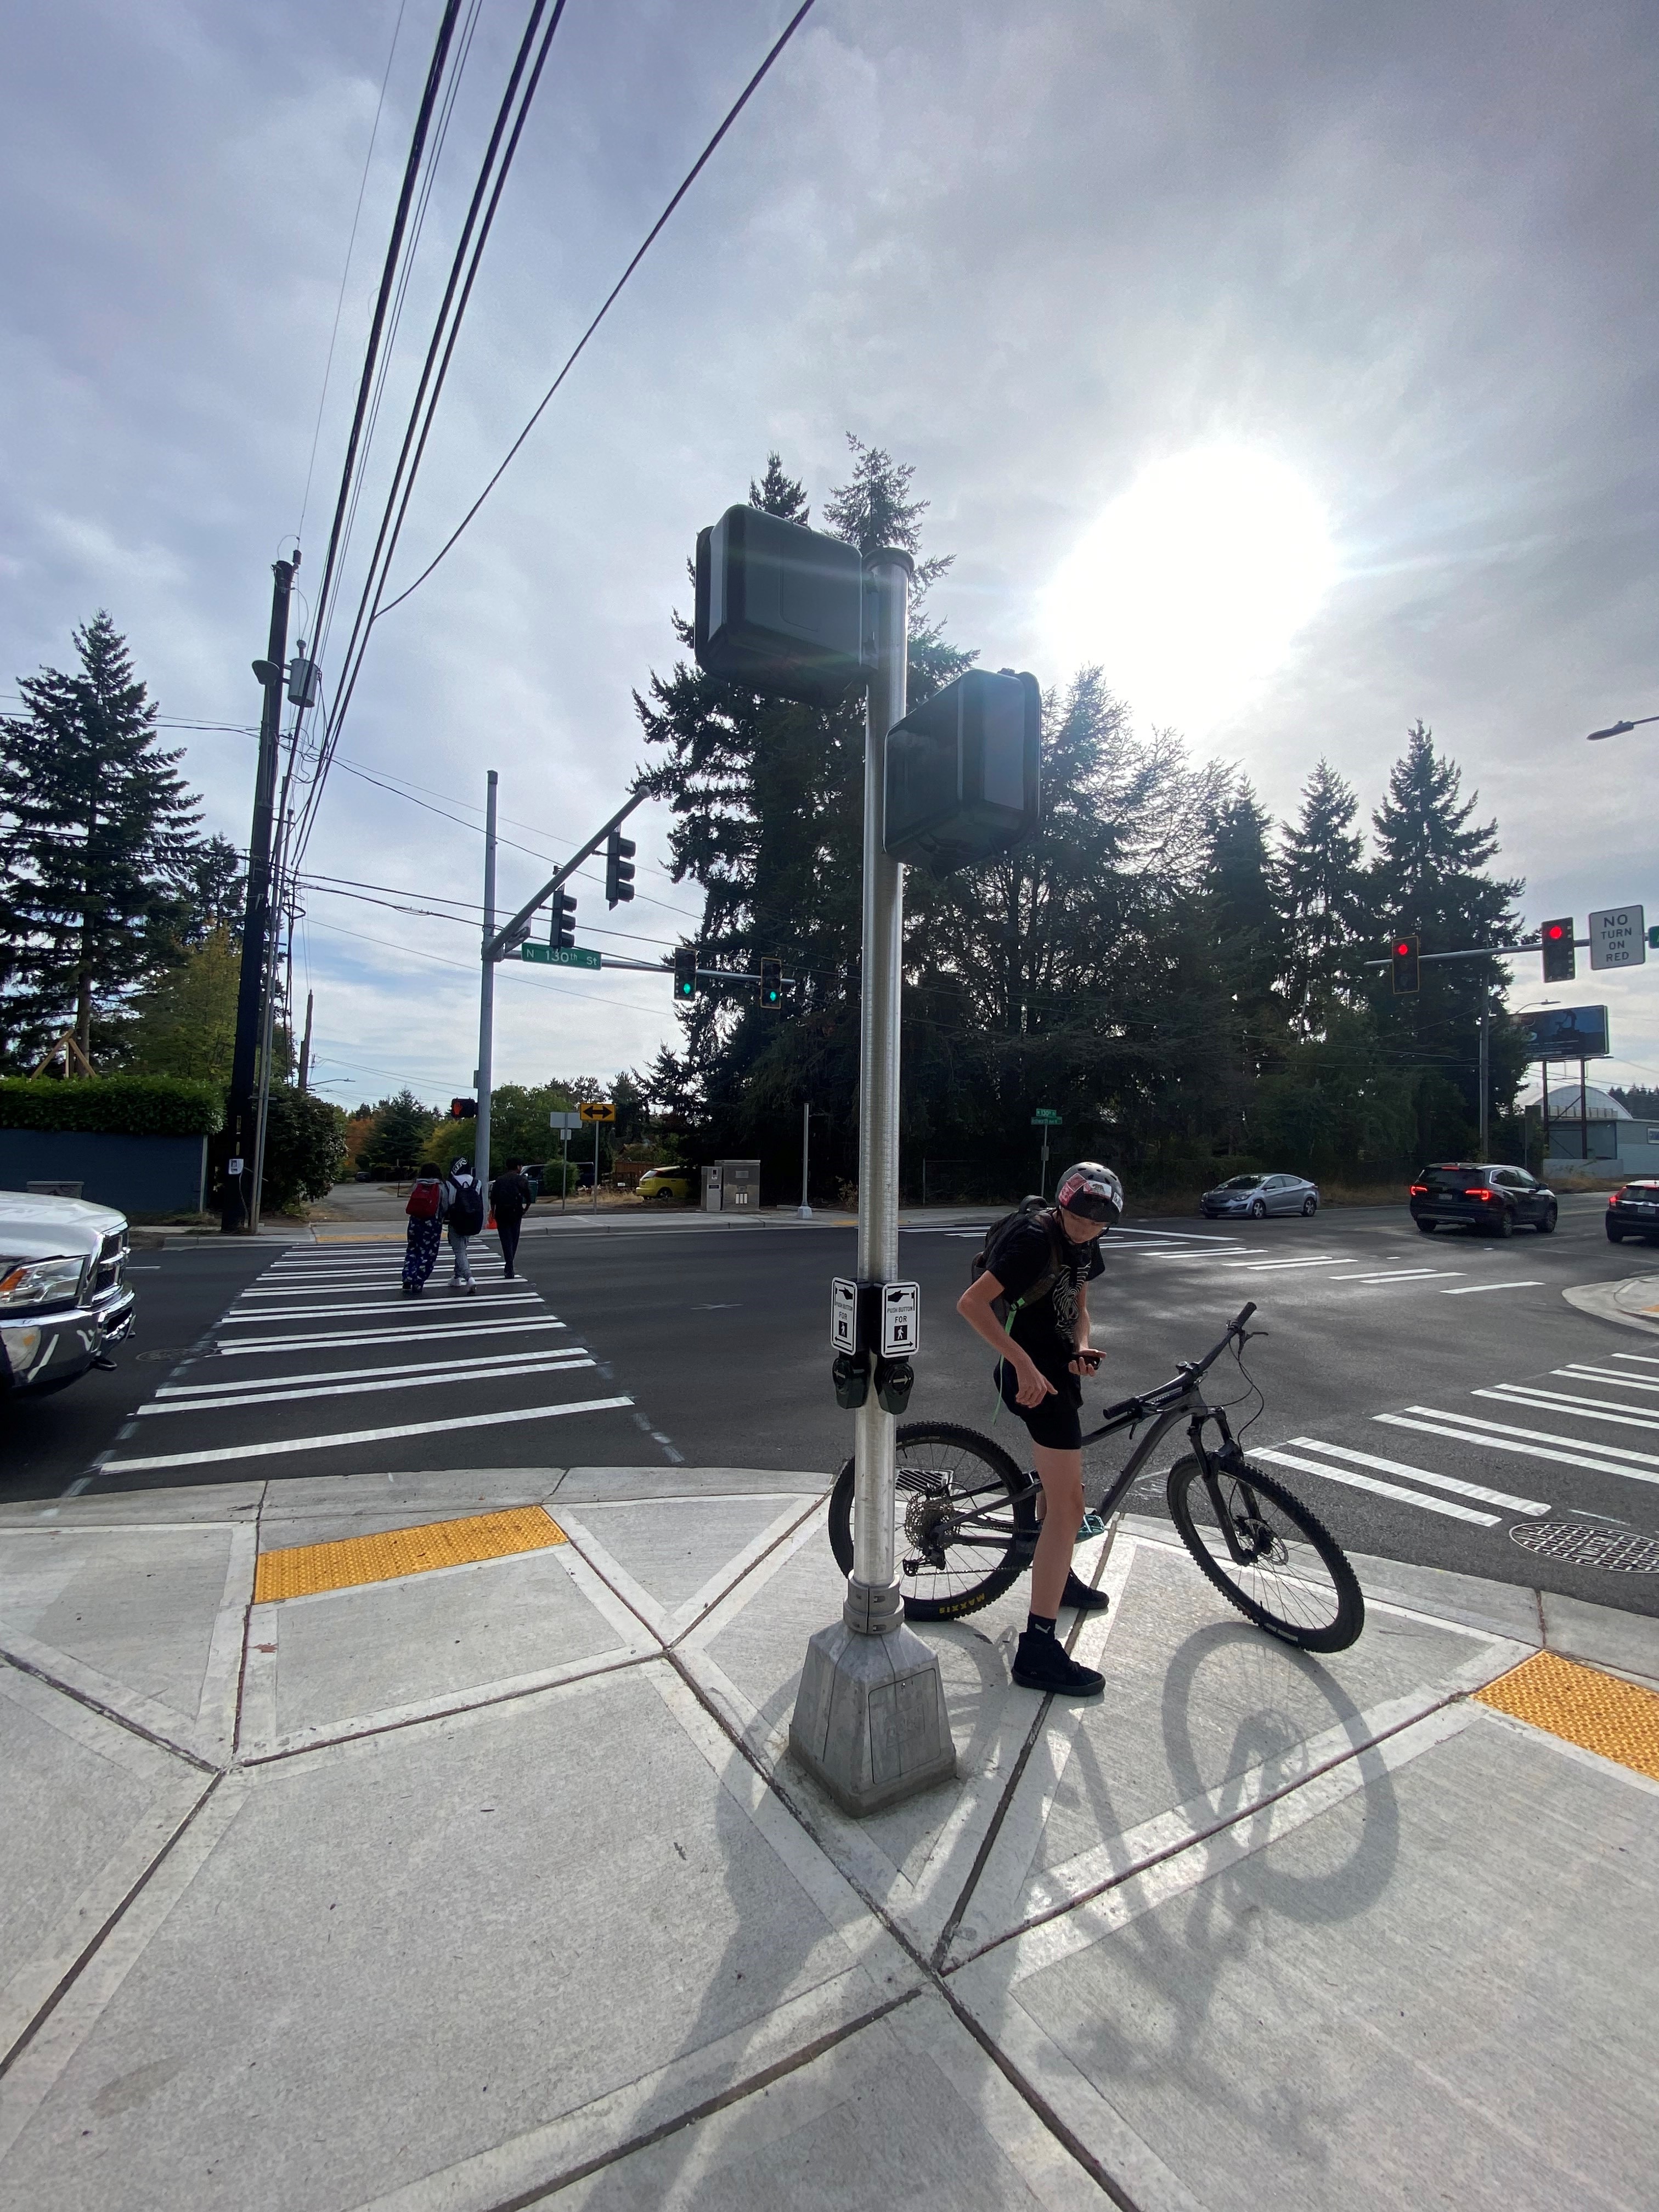 Ingraham High School students using newly installed crossing signal at Ashworth Ave N & N 130th St